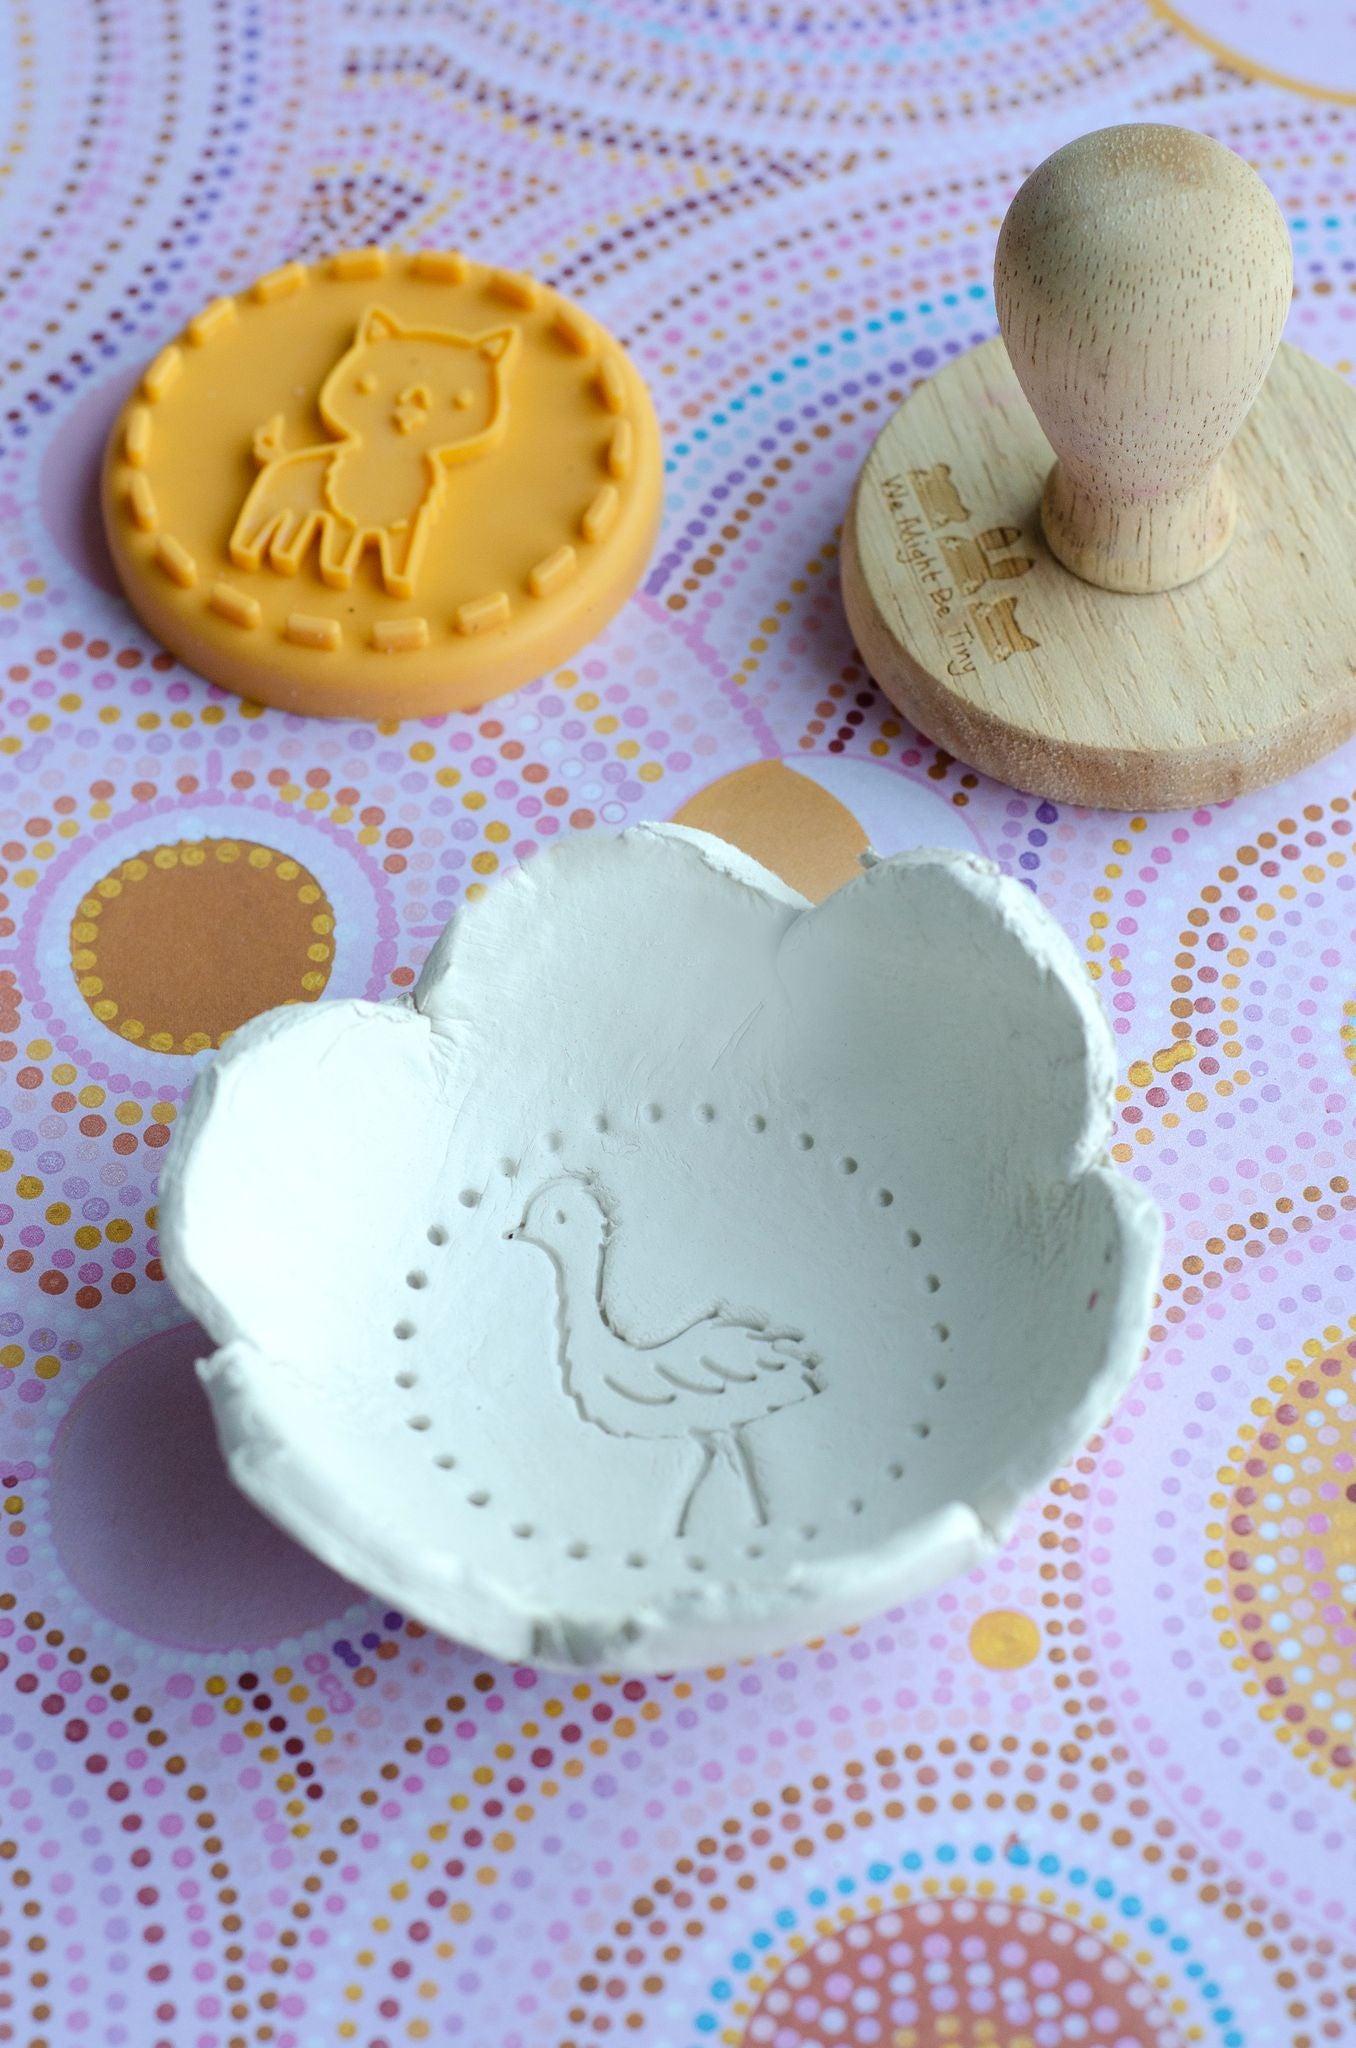 How to Make Trinket Dishes with Air-Dry Clay + Shapes Template